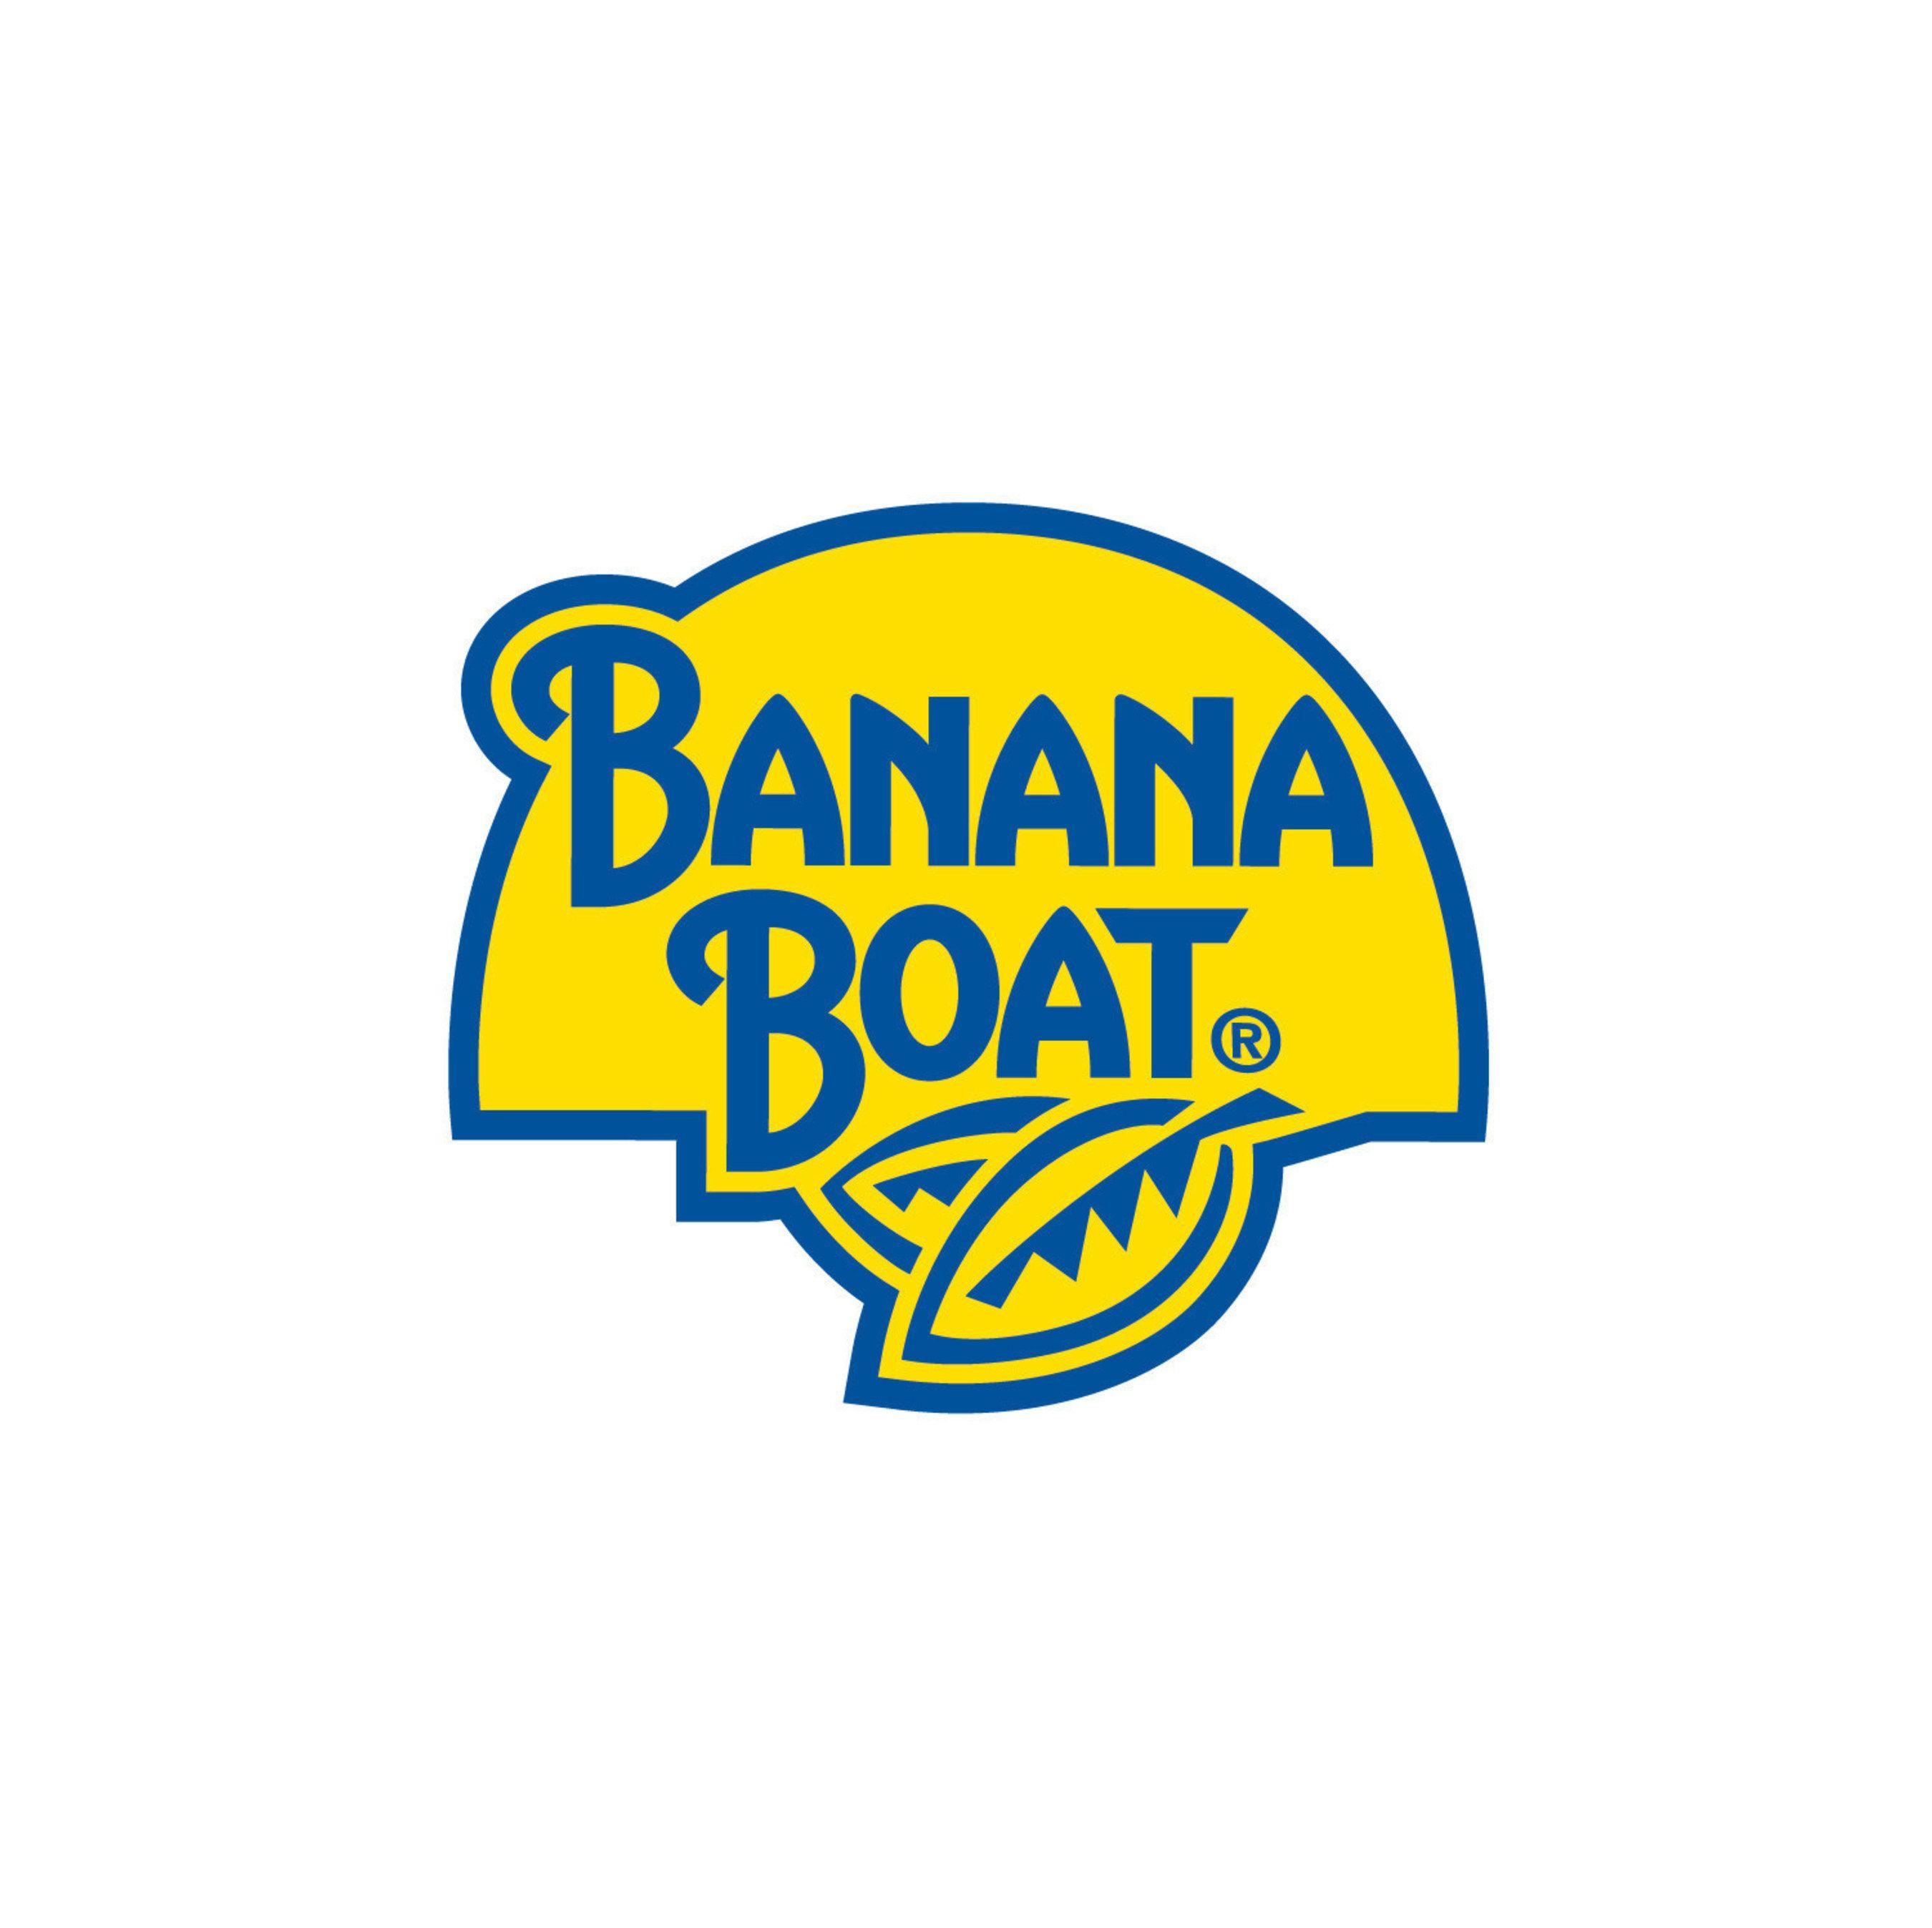 Sunscreen Logo - Banana Boat® Sun Care Launches New Sunscreen Offerings with Unique ...